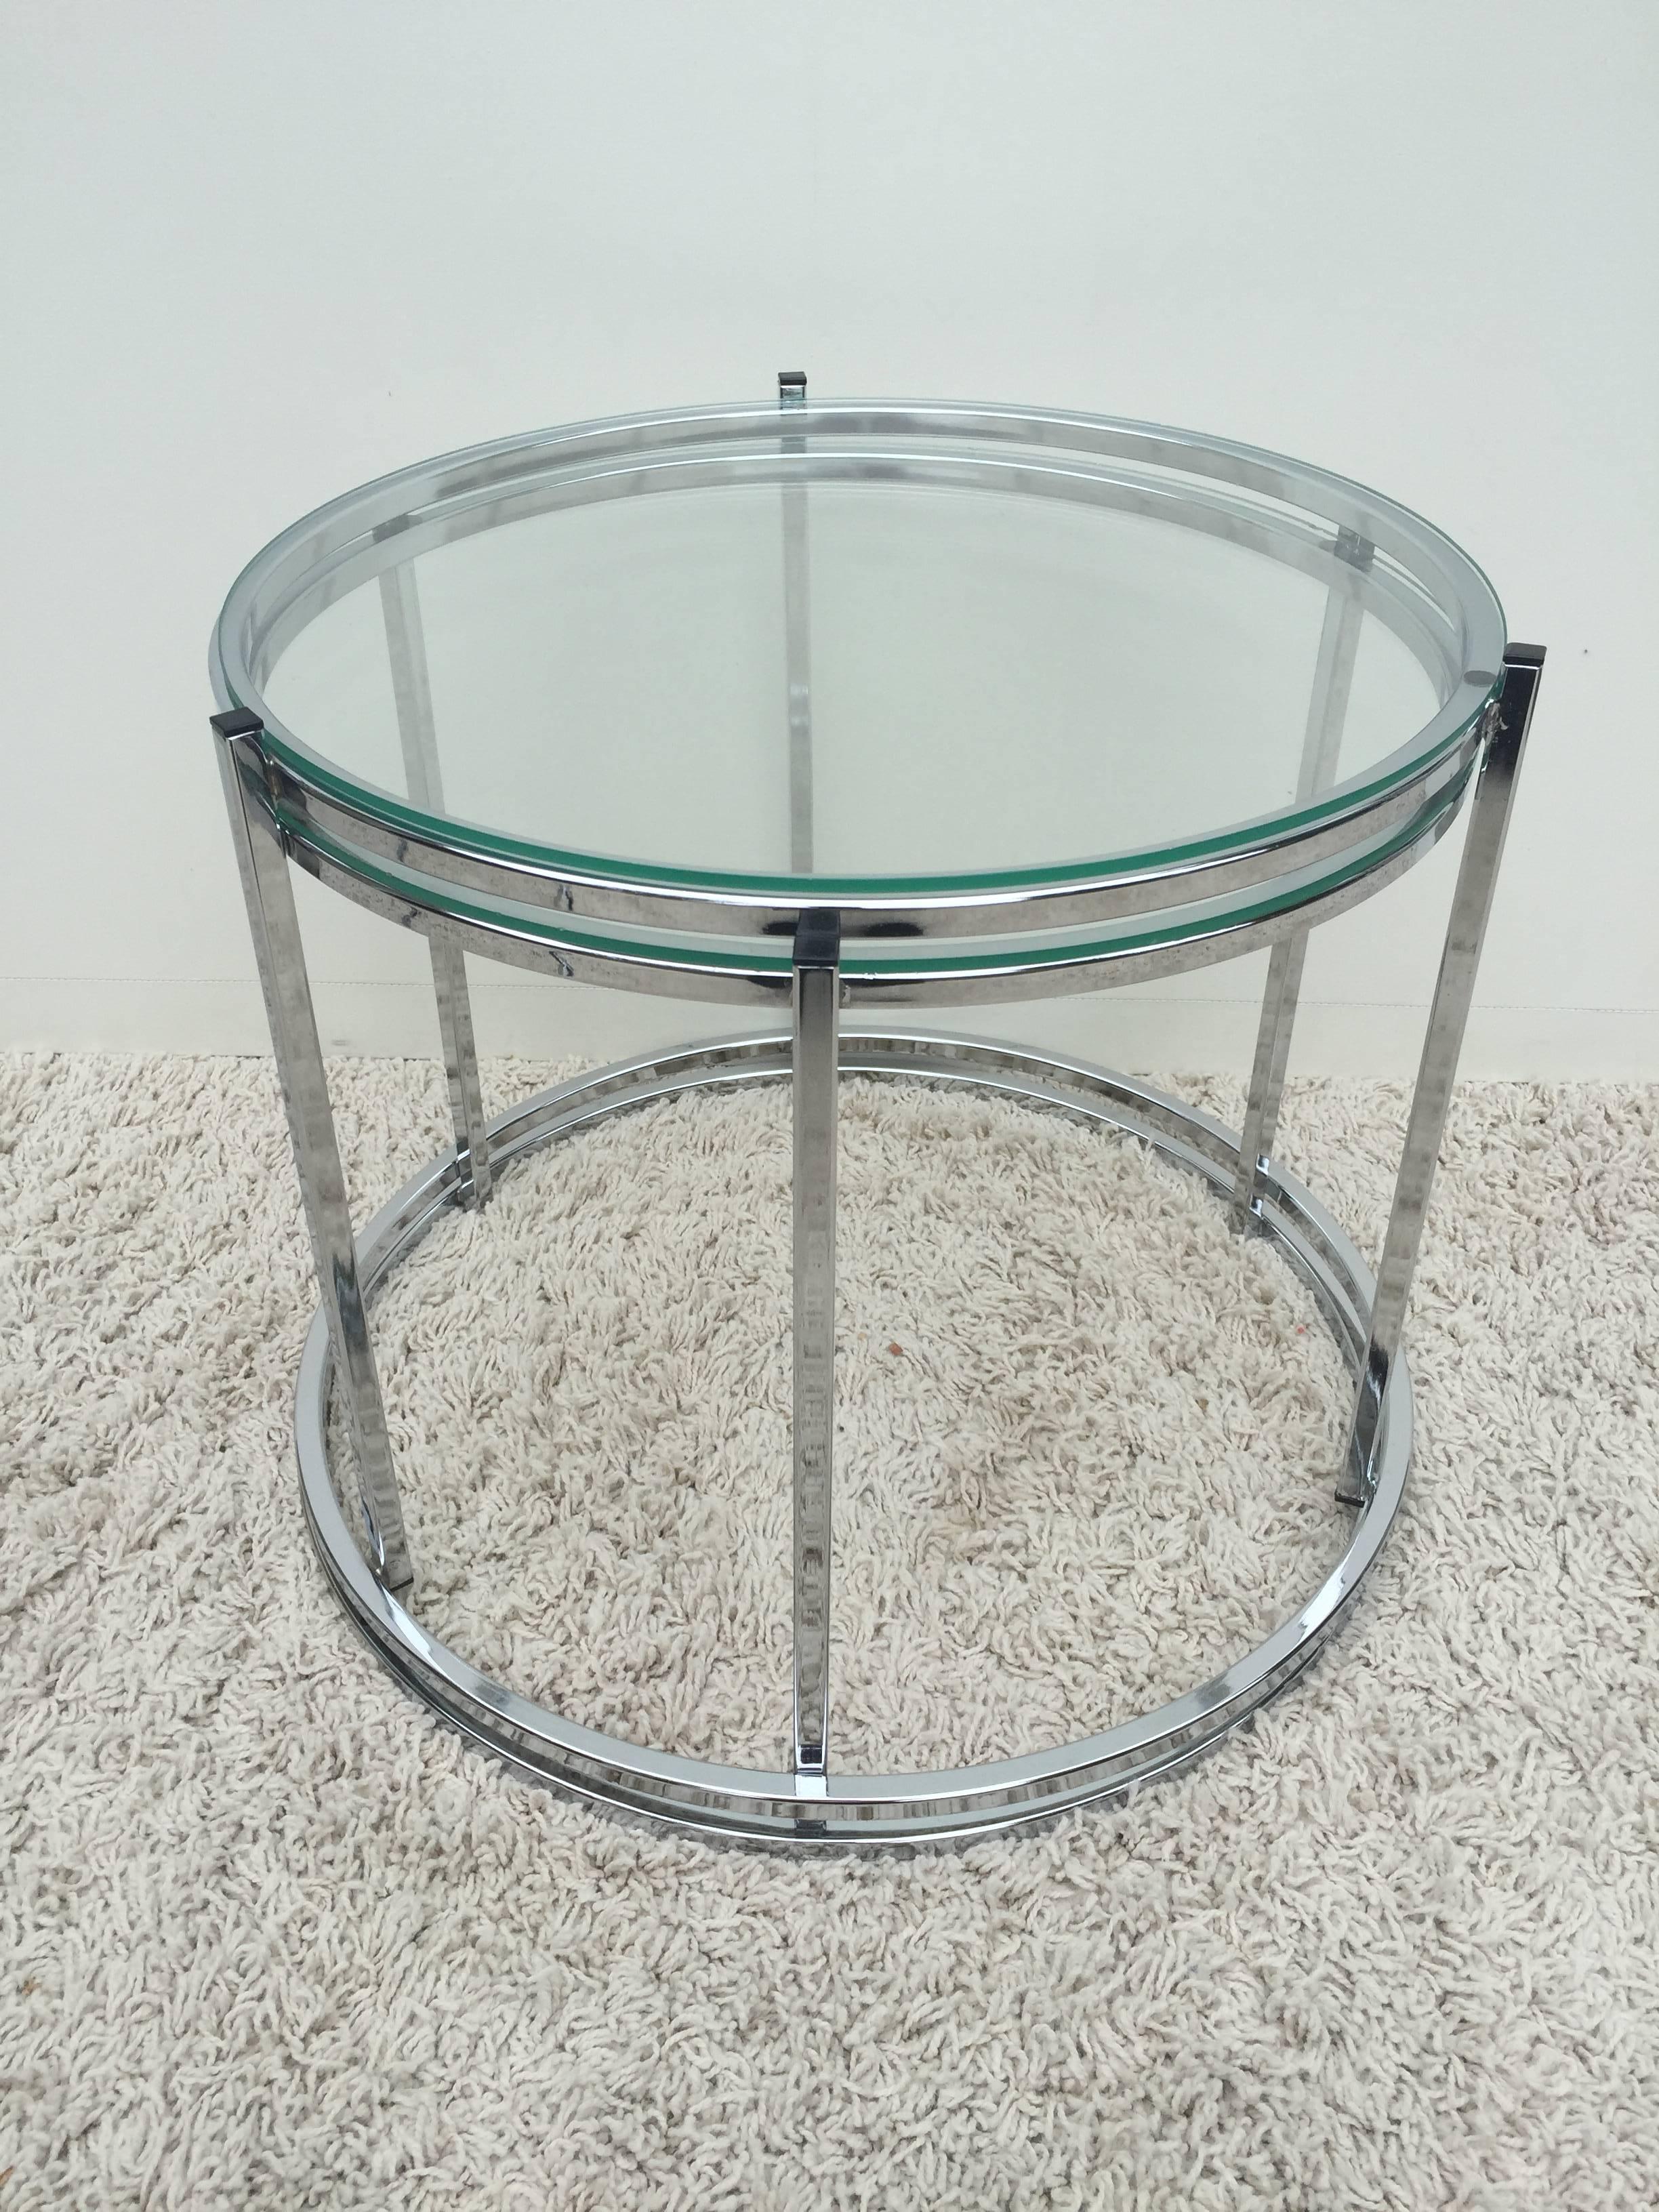 Milo Baughman Style Chrome Glass Stacking/Nesting Side Tables In Excellent Condition For Sale In Westport, CT